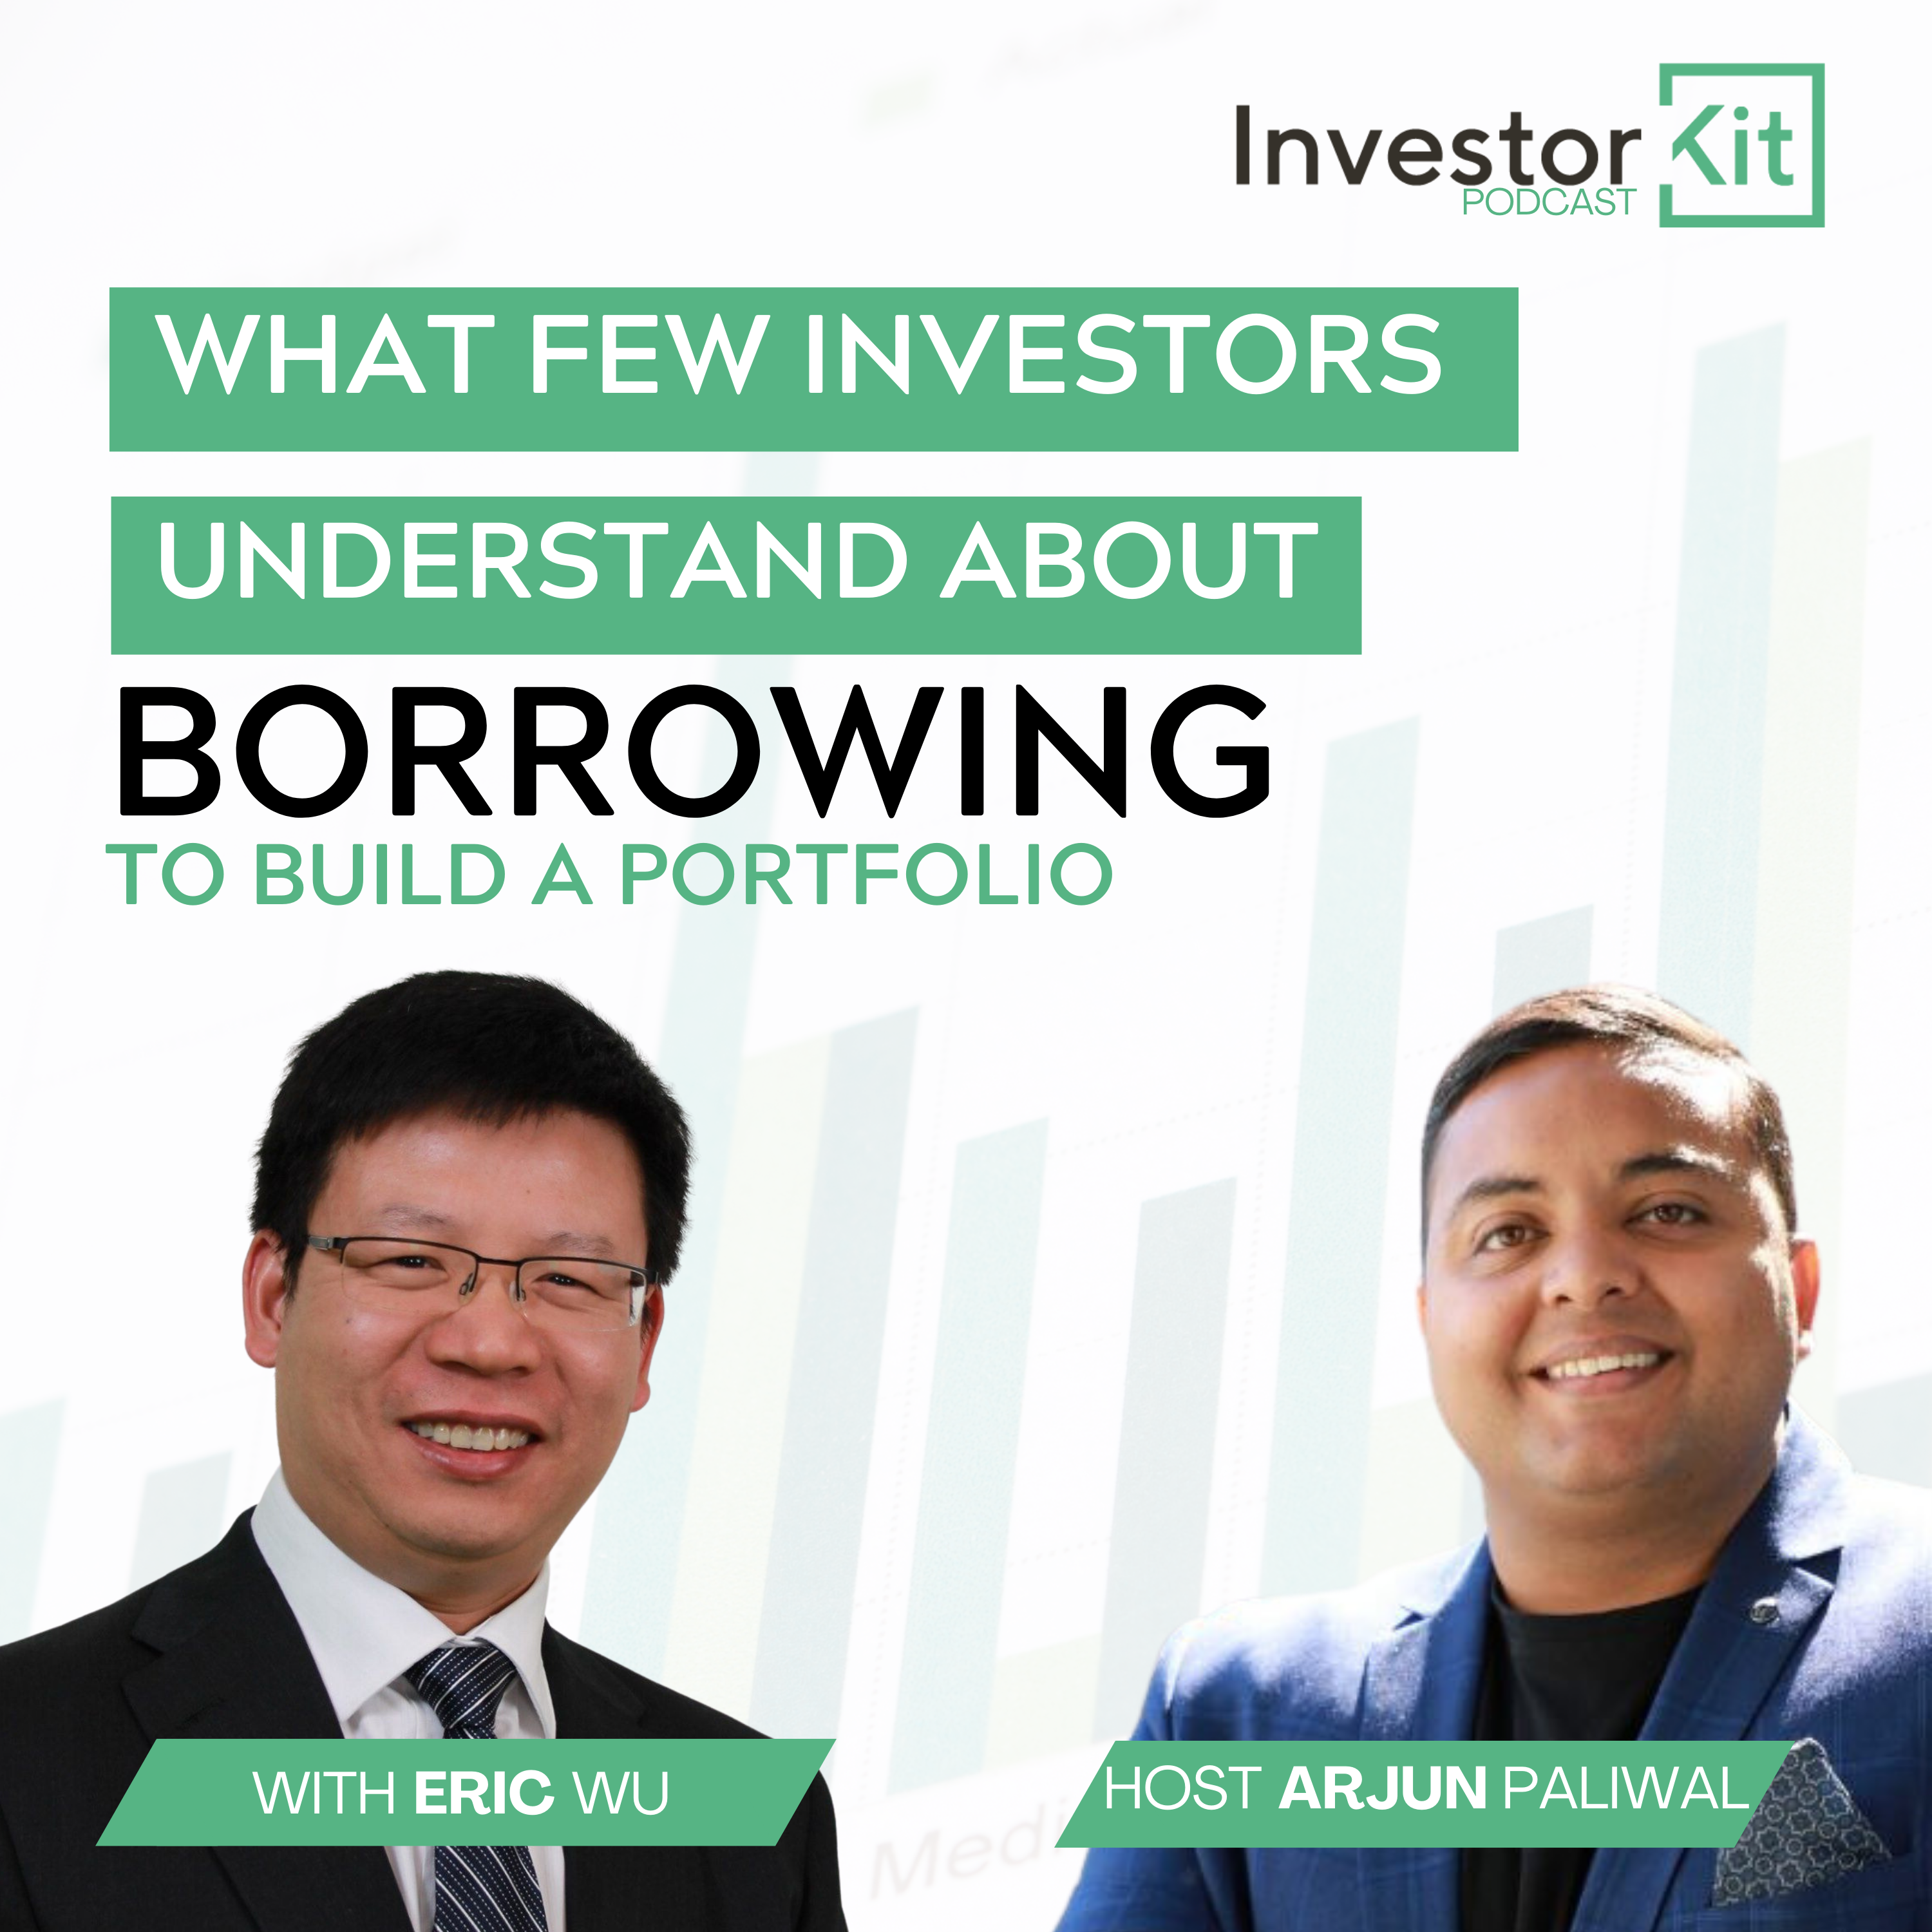 Ep 34 What few investors understand about borrowing that builds a portfolio - With Arjun Paliwal & Eric Wu